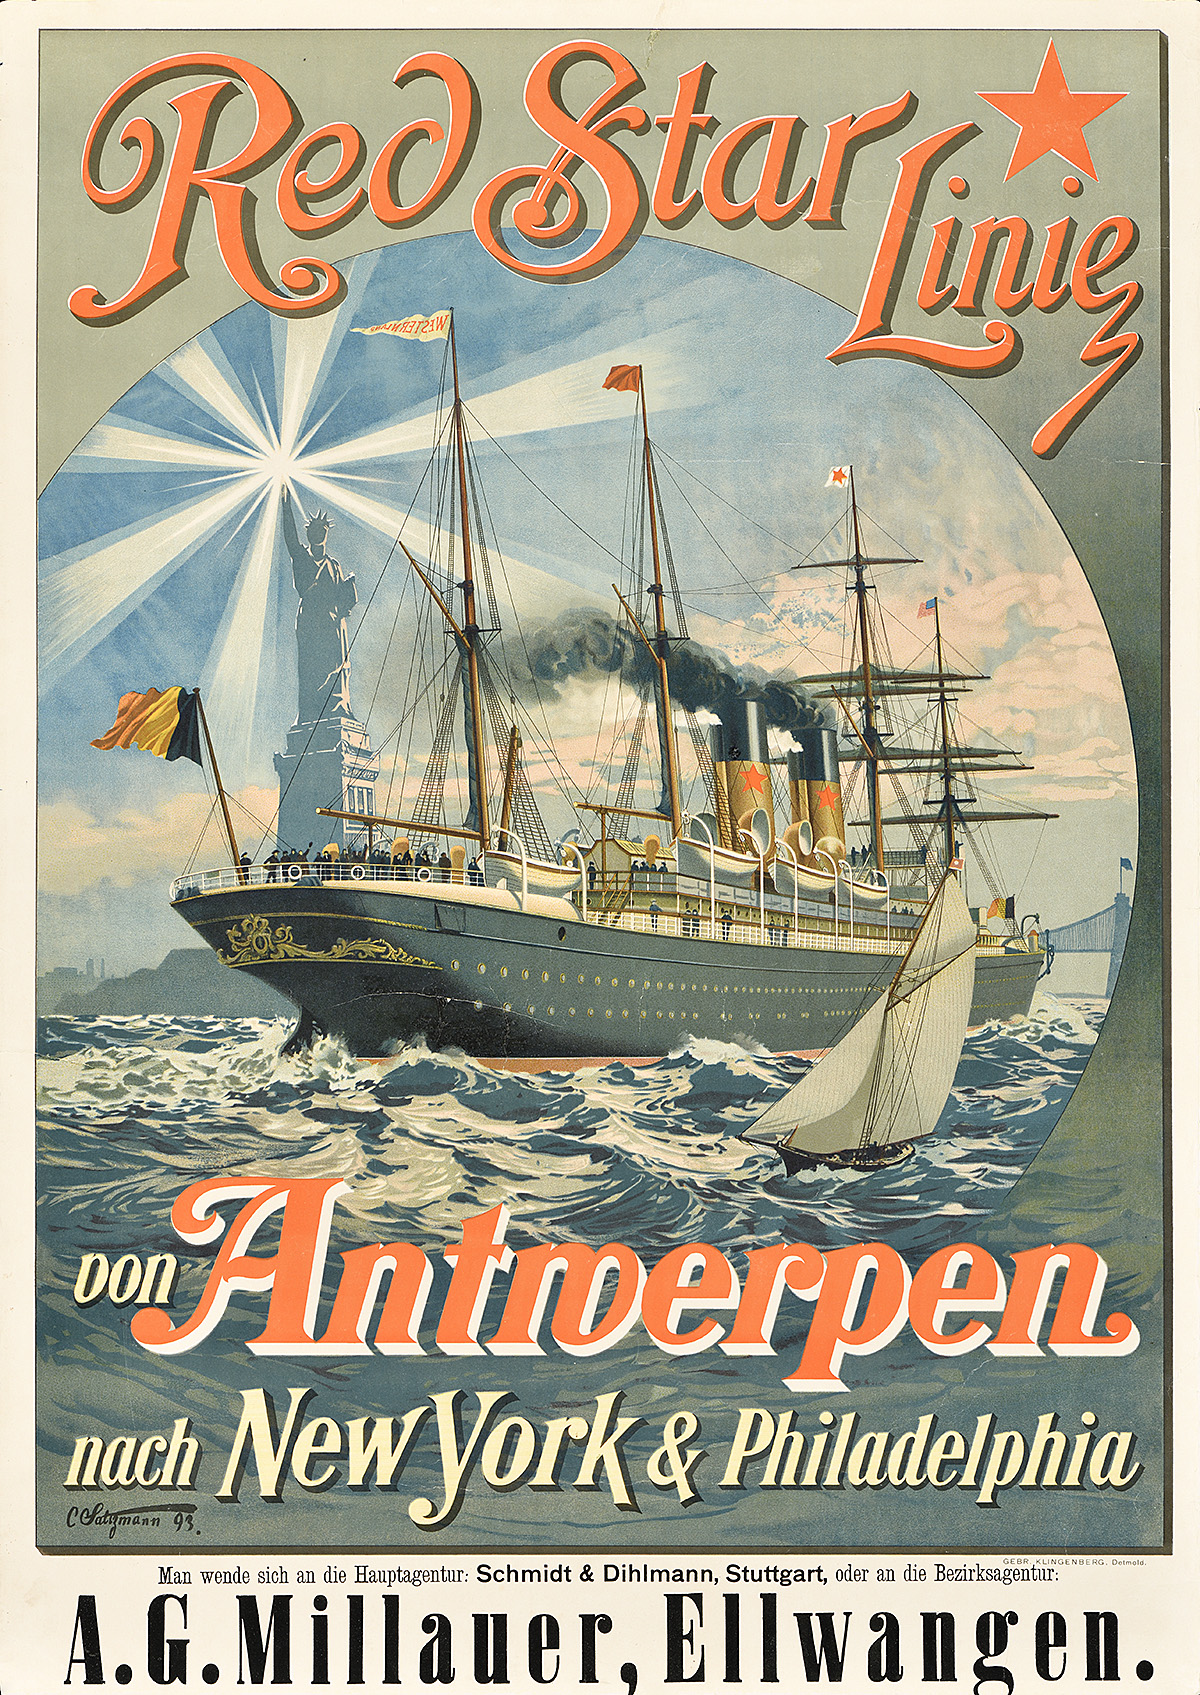 A poster of a large ship with many sails, sailing past a Statue of Liberty with streams of light.